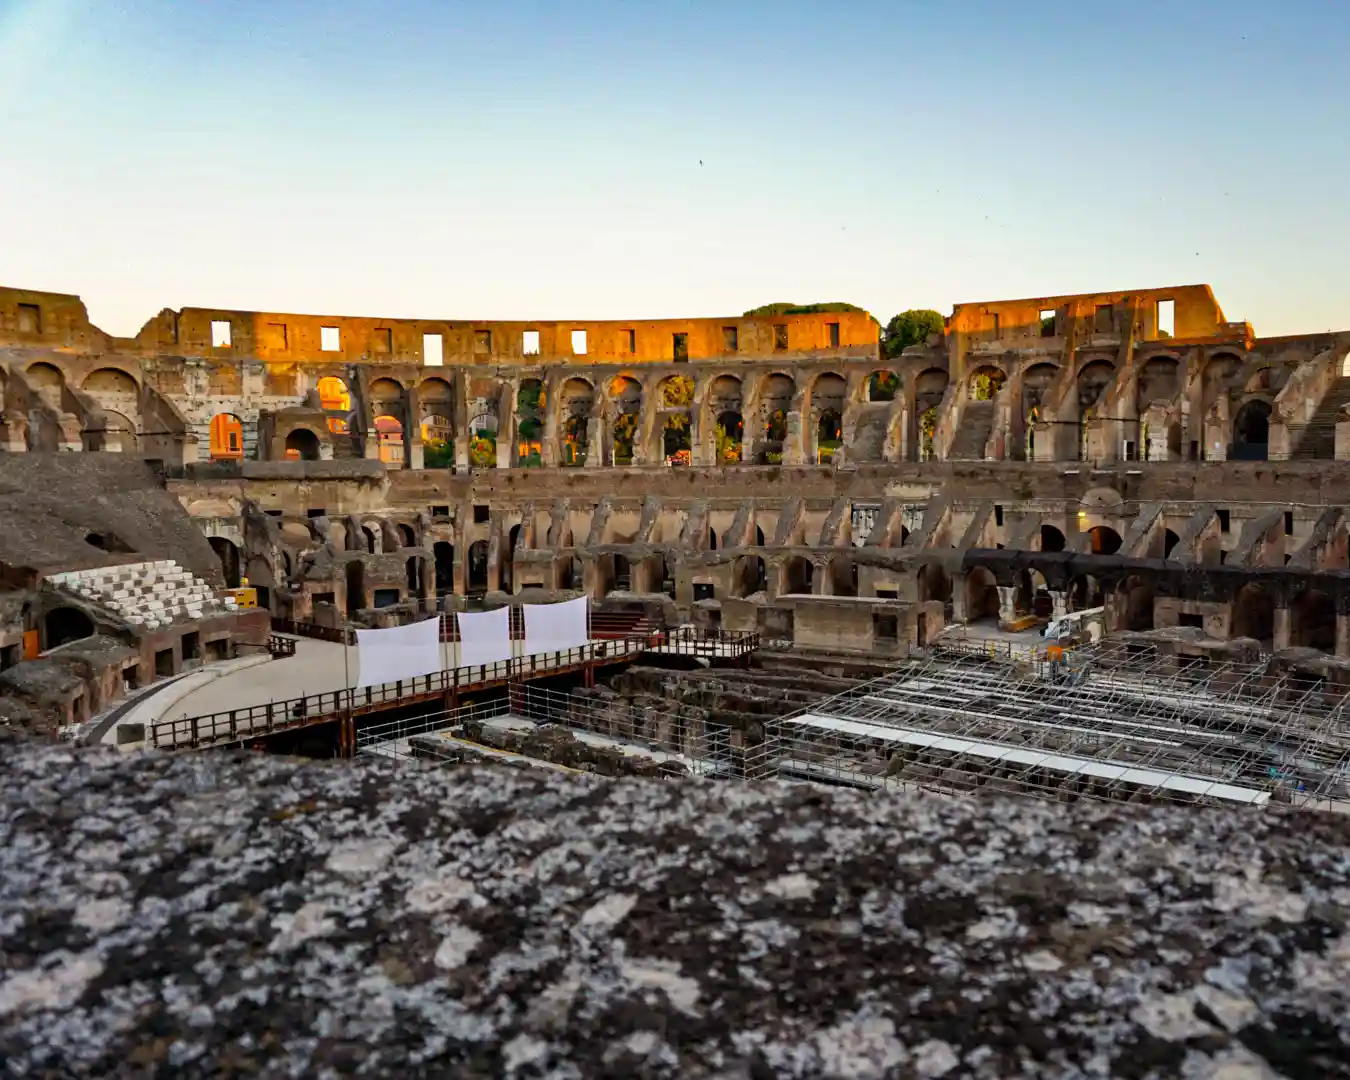 Inside the Colosseum At Sunset